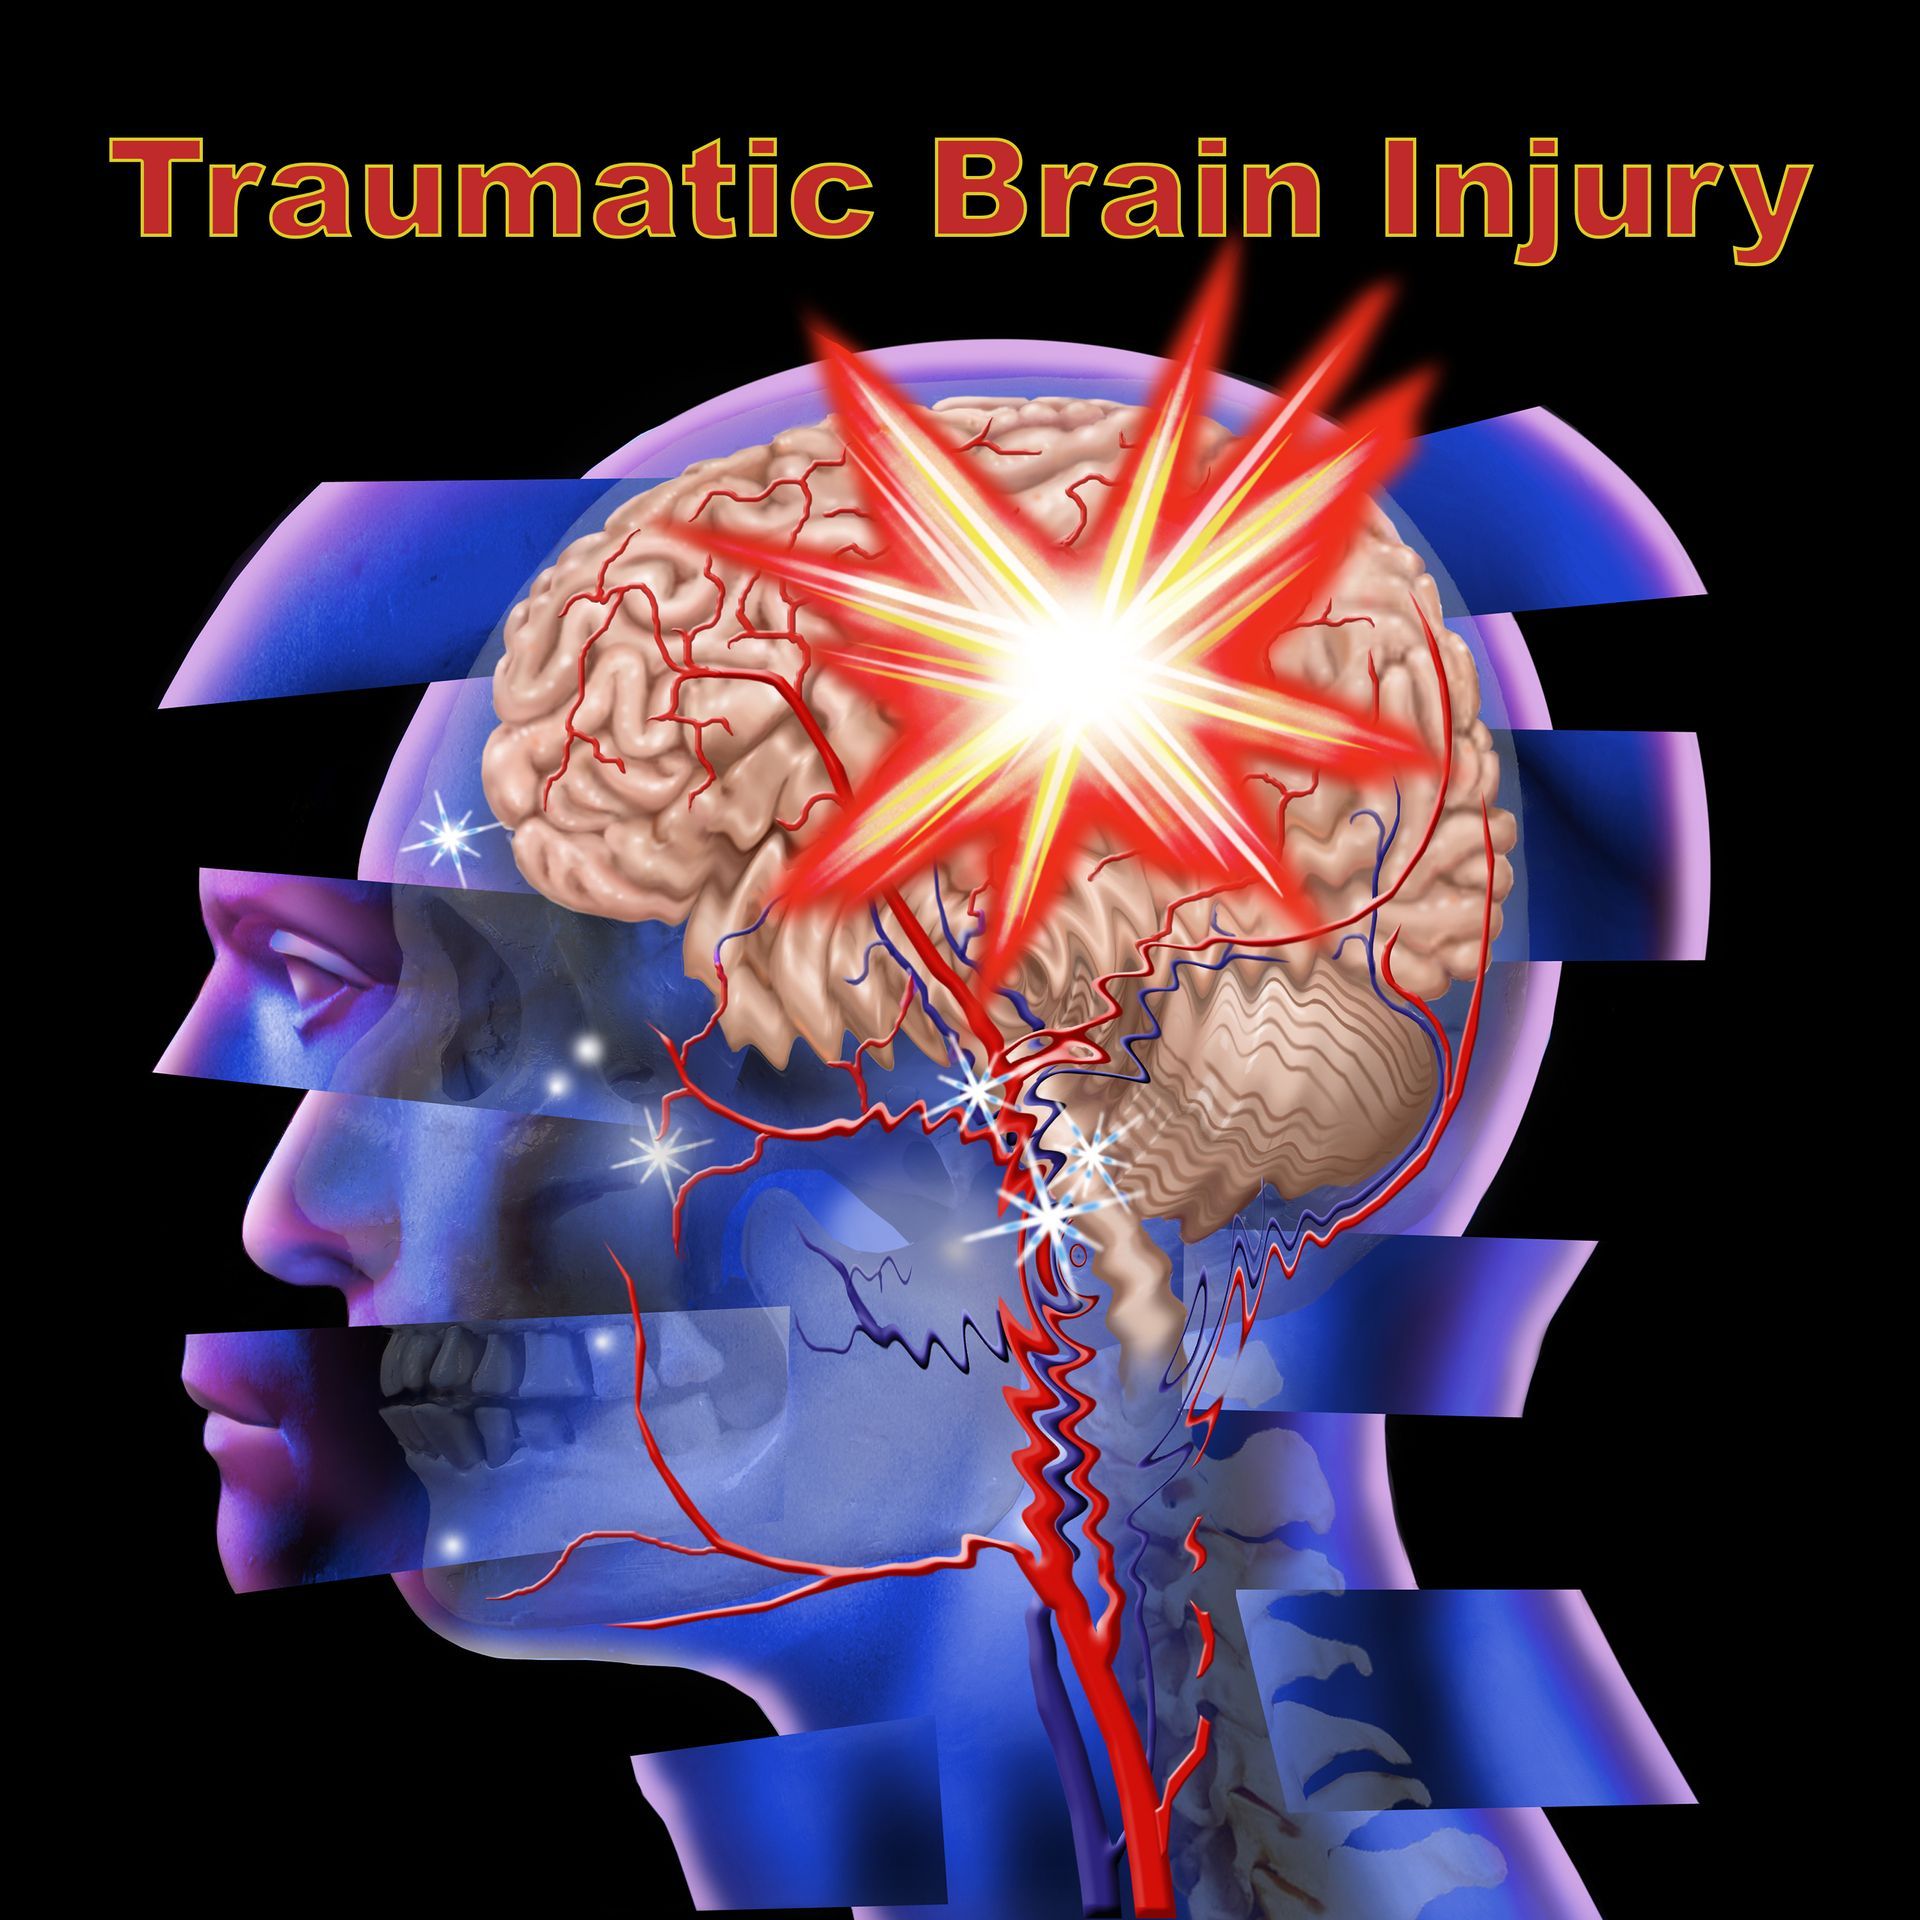 How Bicycle Accidents Can Lead To Traumatic Brain Injuries - The Connection Between Bicycle Accidents & Traumatic Brain Injuries - According to the Centers for Disease Control (CDC), 